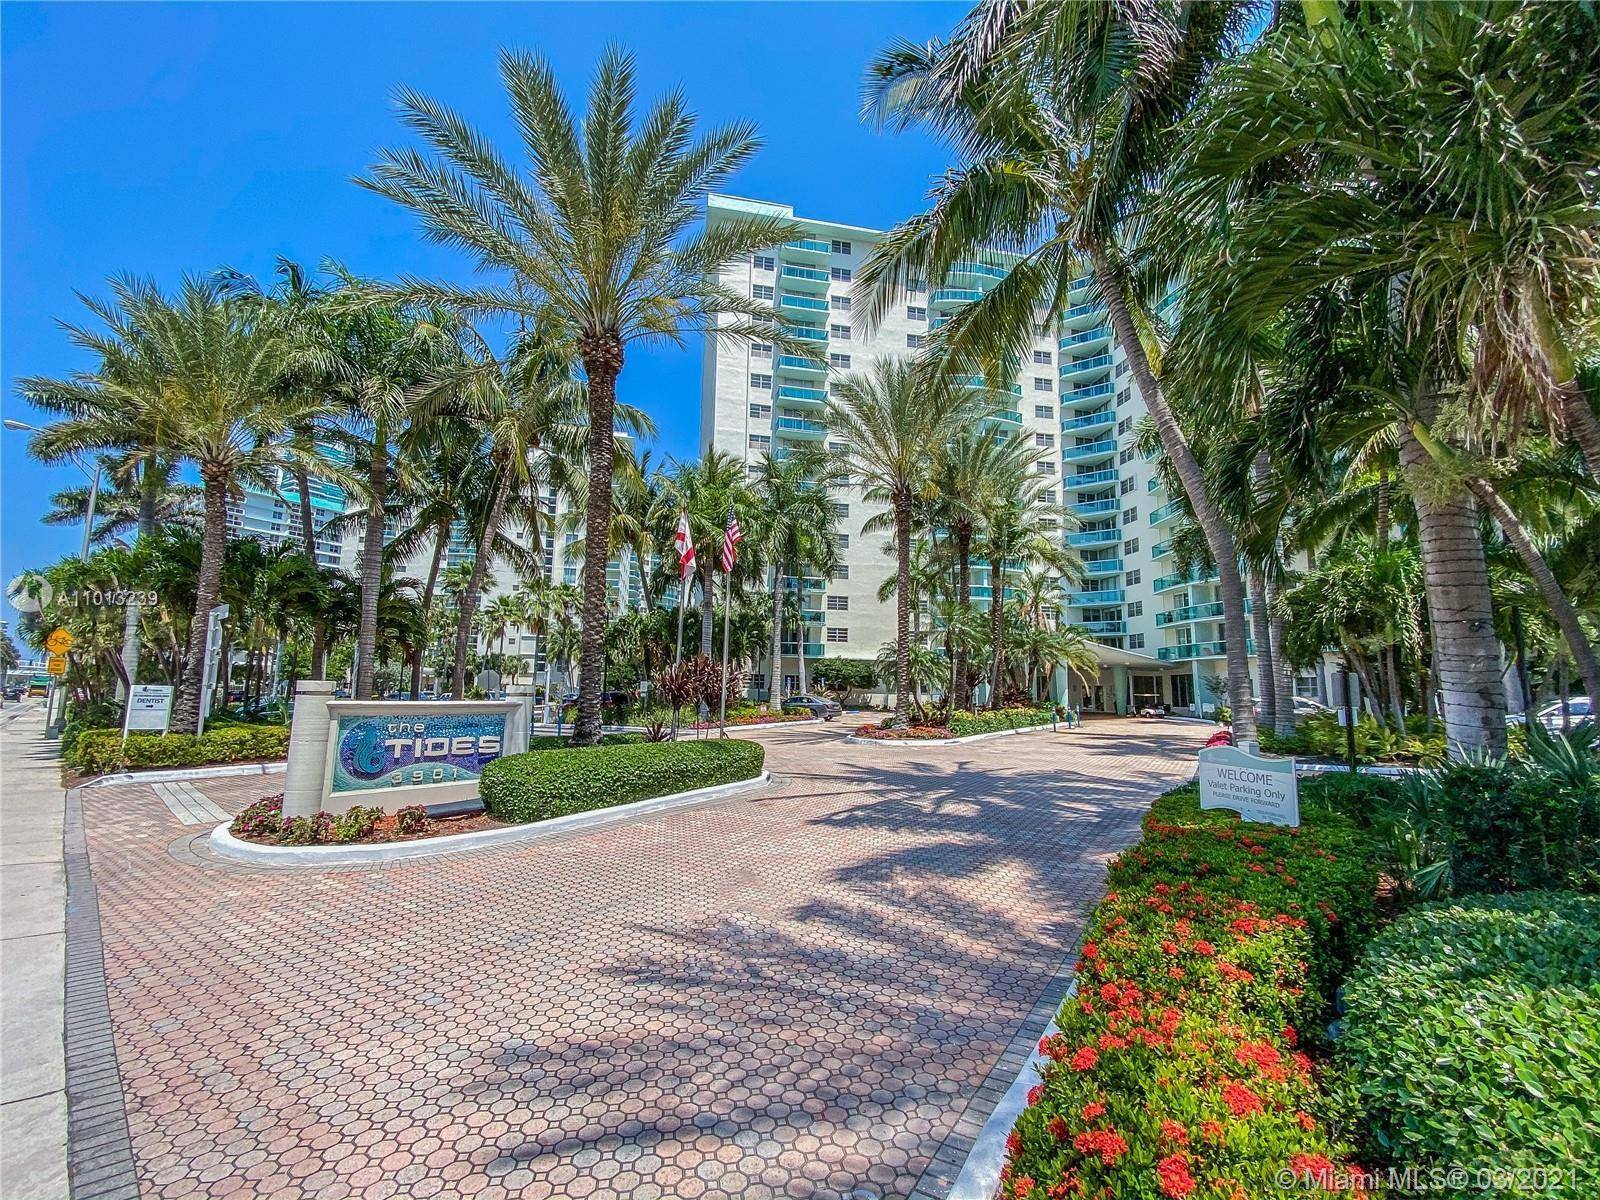 DIRECT OCEANFRONT CONDO, 11TH FLOOR WITH FABULOUS SUNSET INTRA COASTAL VIEW.